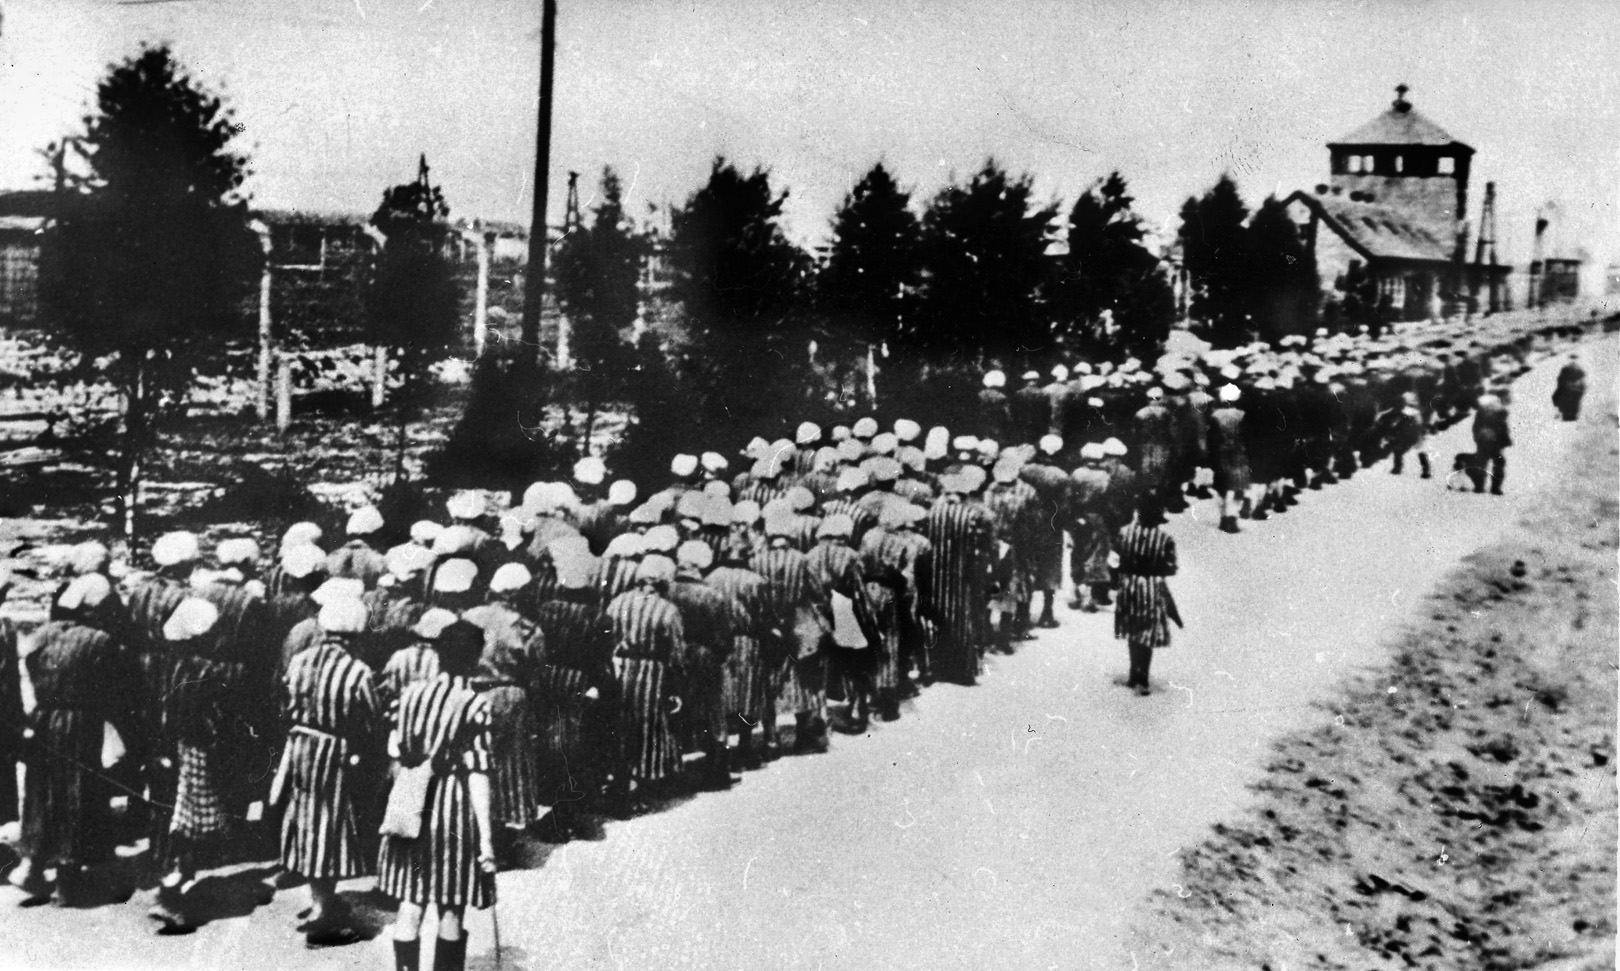 Female prisoners at Auschwitz-Birkenau return from a work detail. Inmates here were especially fearful of Grese and her sadistic excesses.